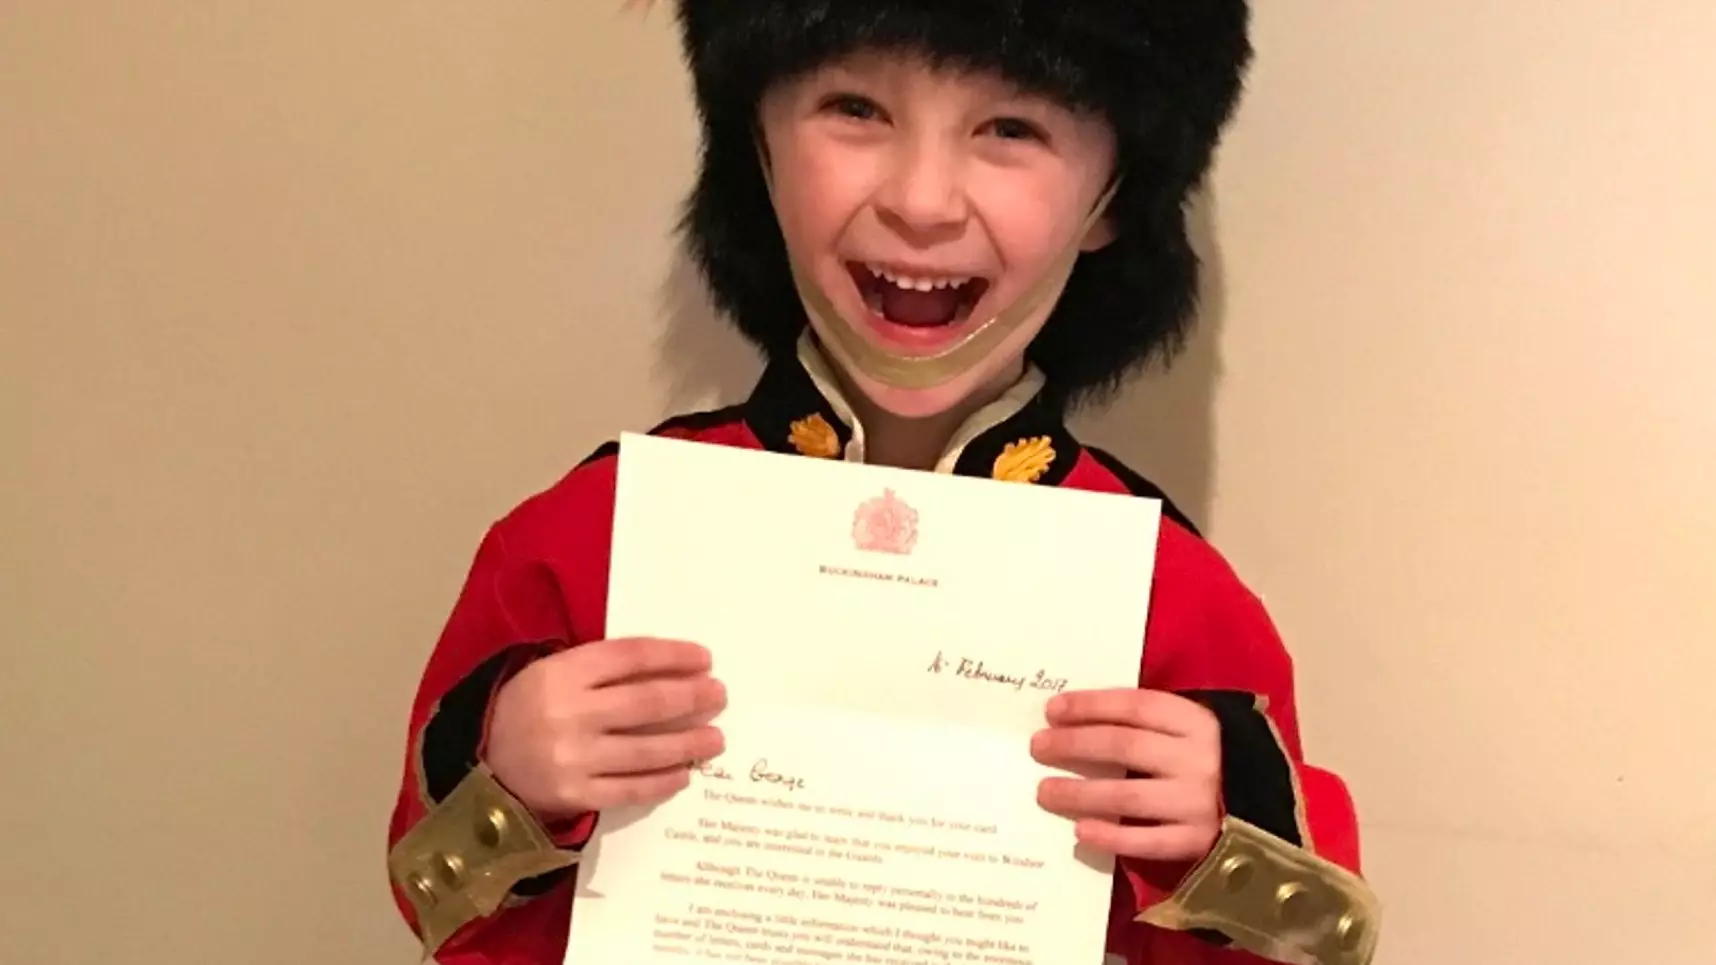 Six-Year-Old Boy Who Dreams Of Being A Guard Gets Response From The Queen